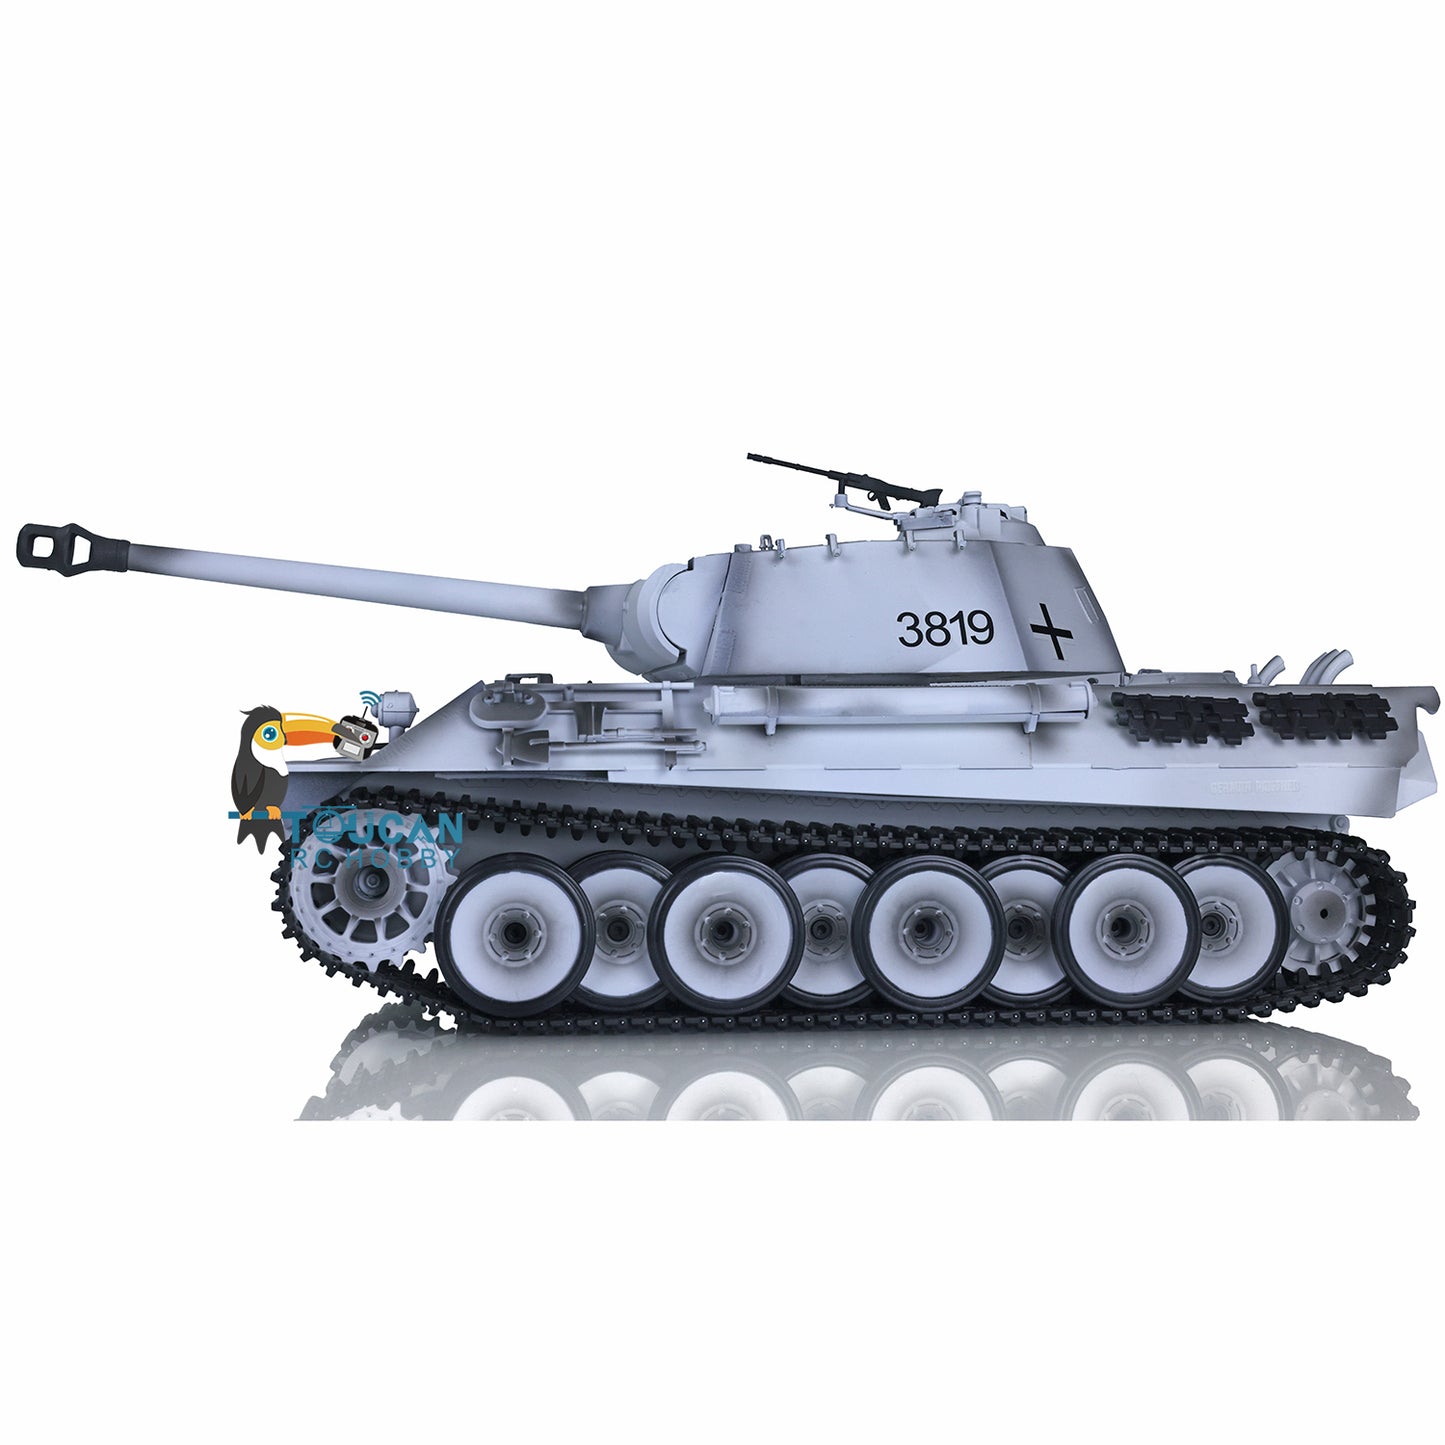 Henglong 1/16 7.0 RC Tank Panther 3819 w/ FPV 360Degrees Rotating Turret Metal Tracks Road Wheels Steel Gearbox Engine Sound Smoking